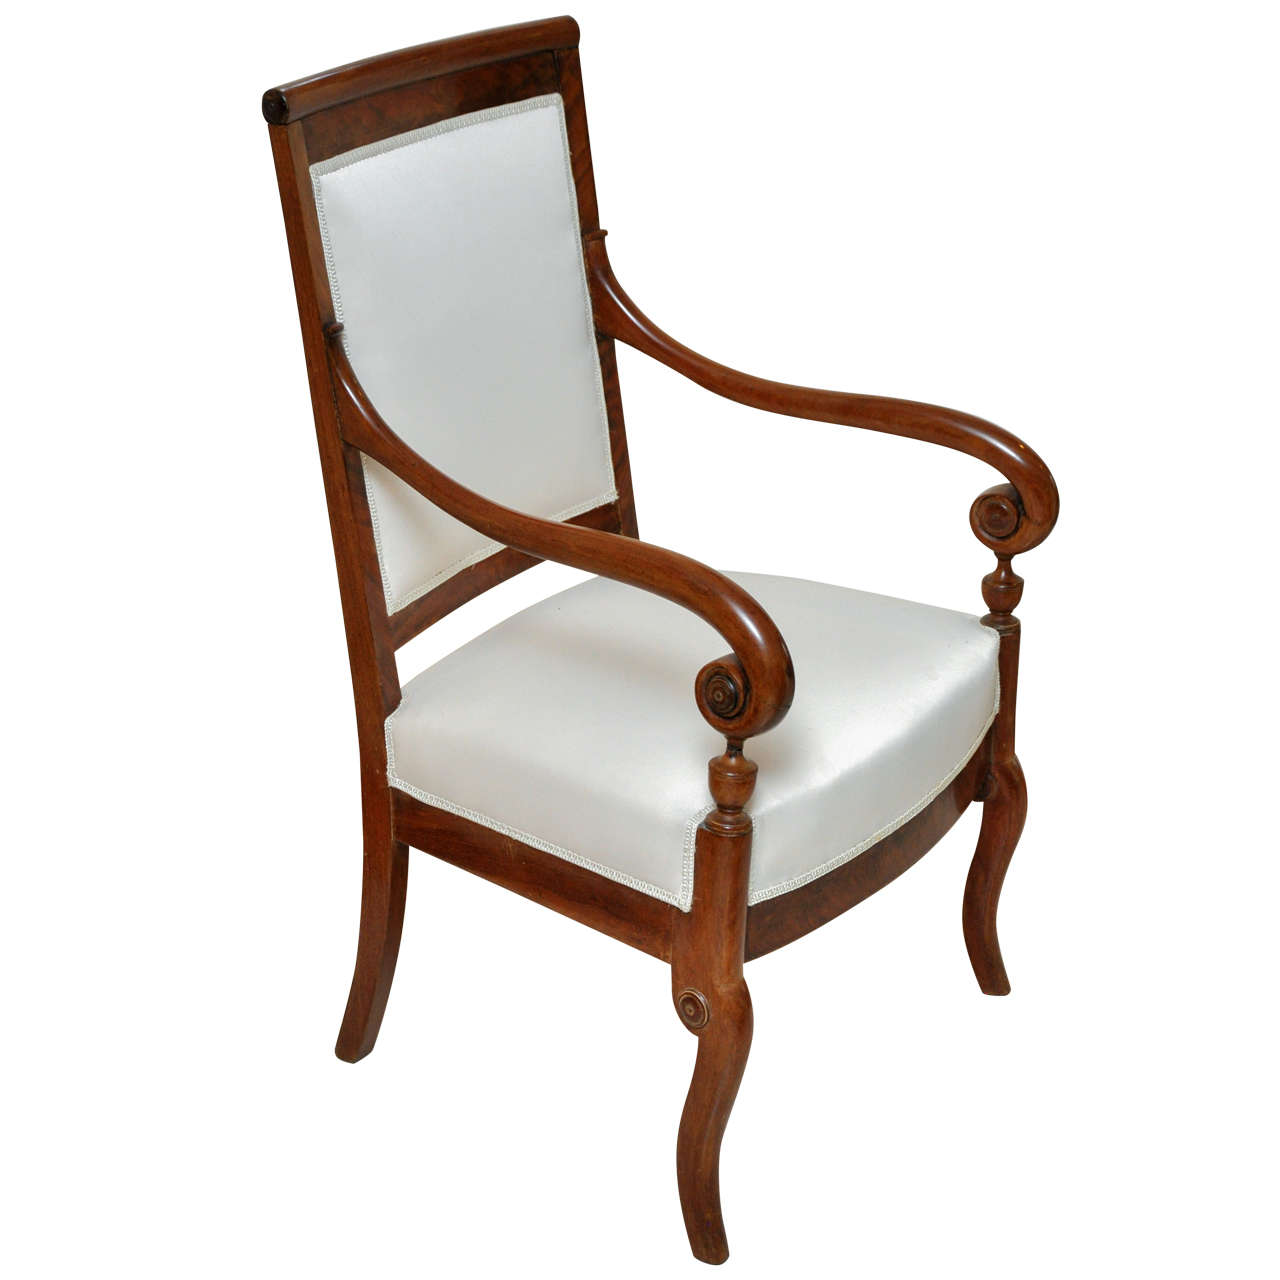 German Neoclassical Armchair, c. 1830 For Sale